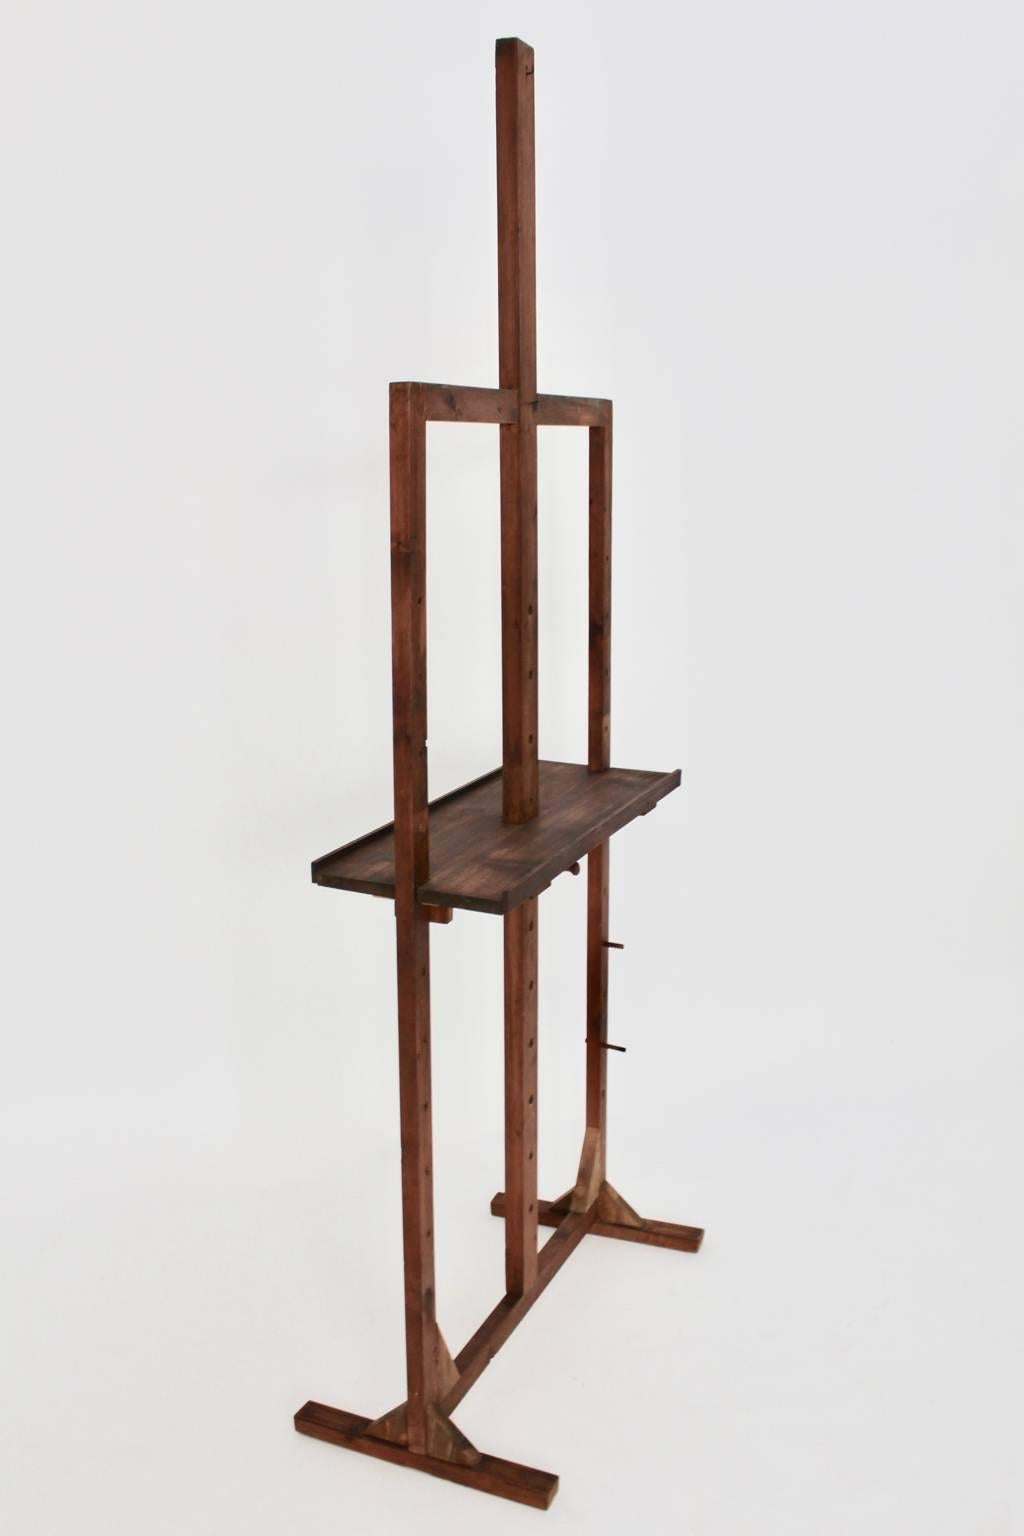 Very decorative brown midcentury easel, Austria, 1950s.

The easel was made of spruce - brown stained. The pad board is adjustable from up to down and for holding a painting with 160 cm height.
Original condition - carefully cleaned 

It is a great